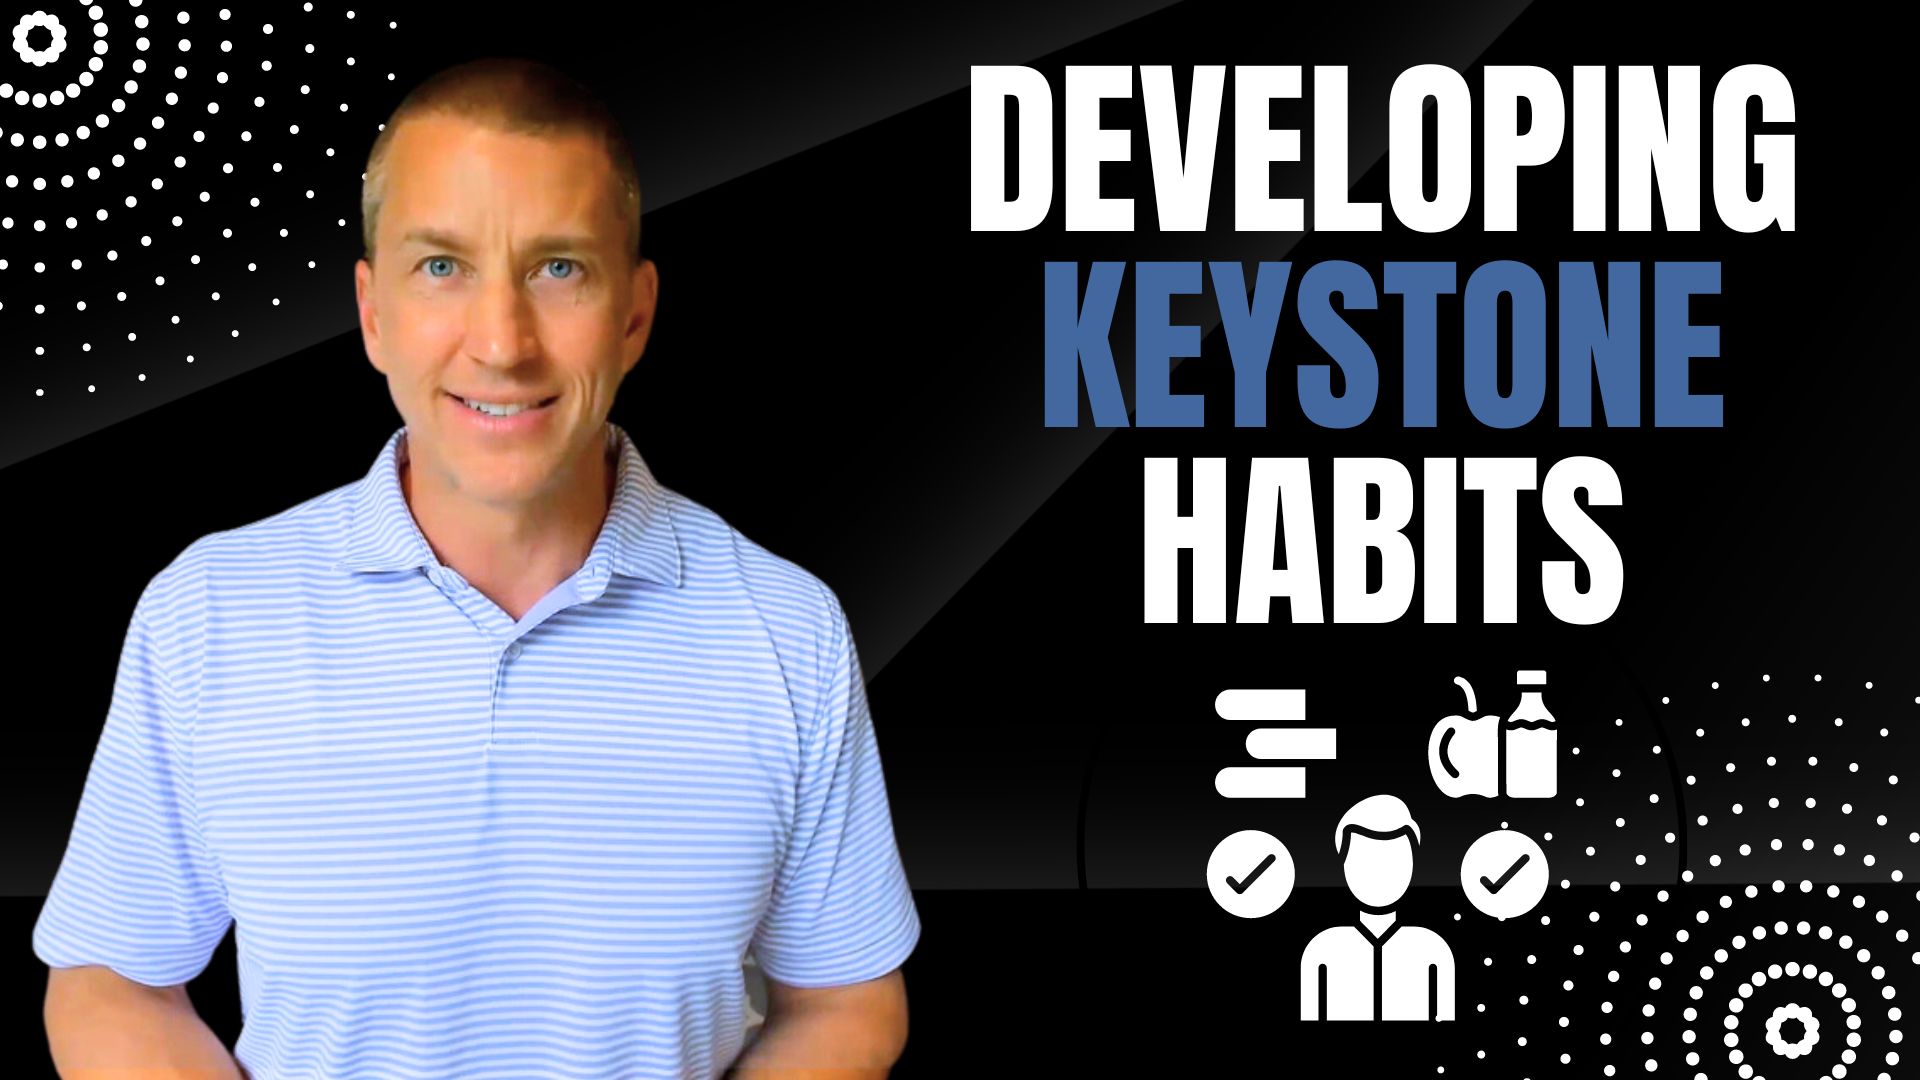 Keystone Habits: Your Key to a Productive and Purposeful Life